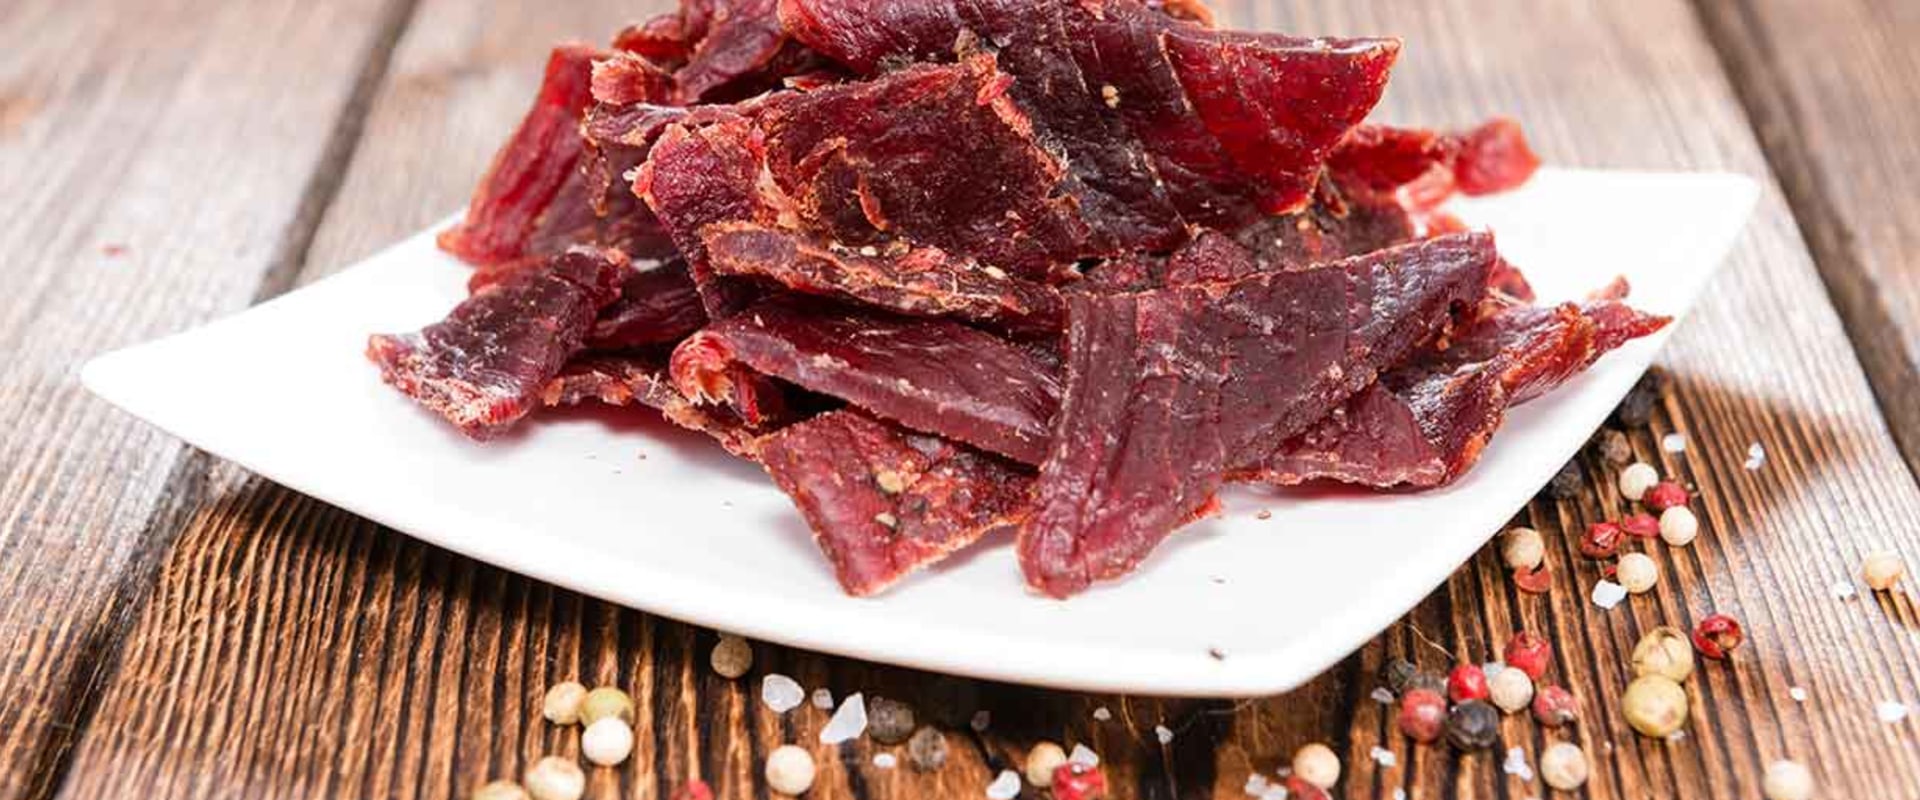 Is beef jerky good for lean muscle?